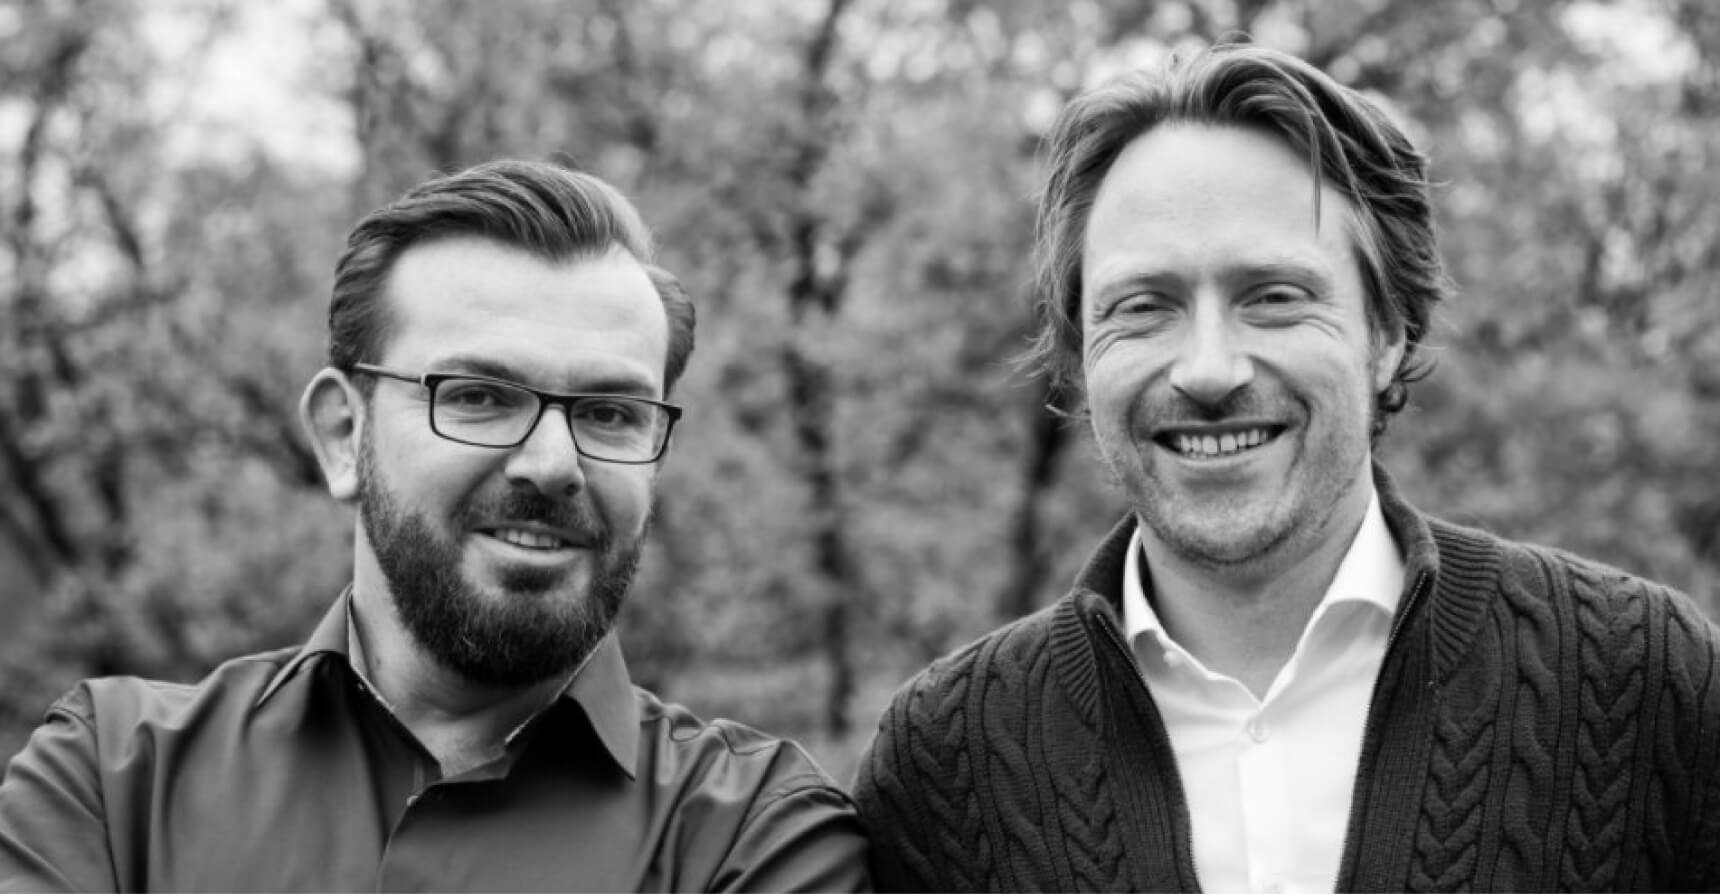 Baze Co-Founders, Isam Haddad, CTO and Philipp Schulte, CEO